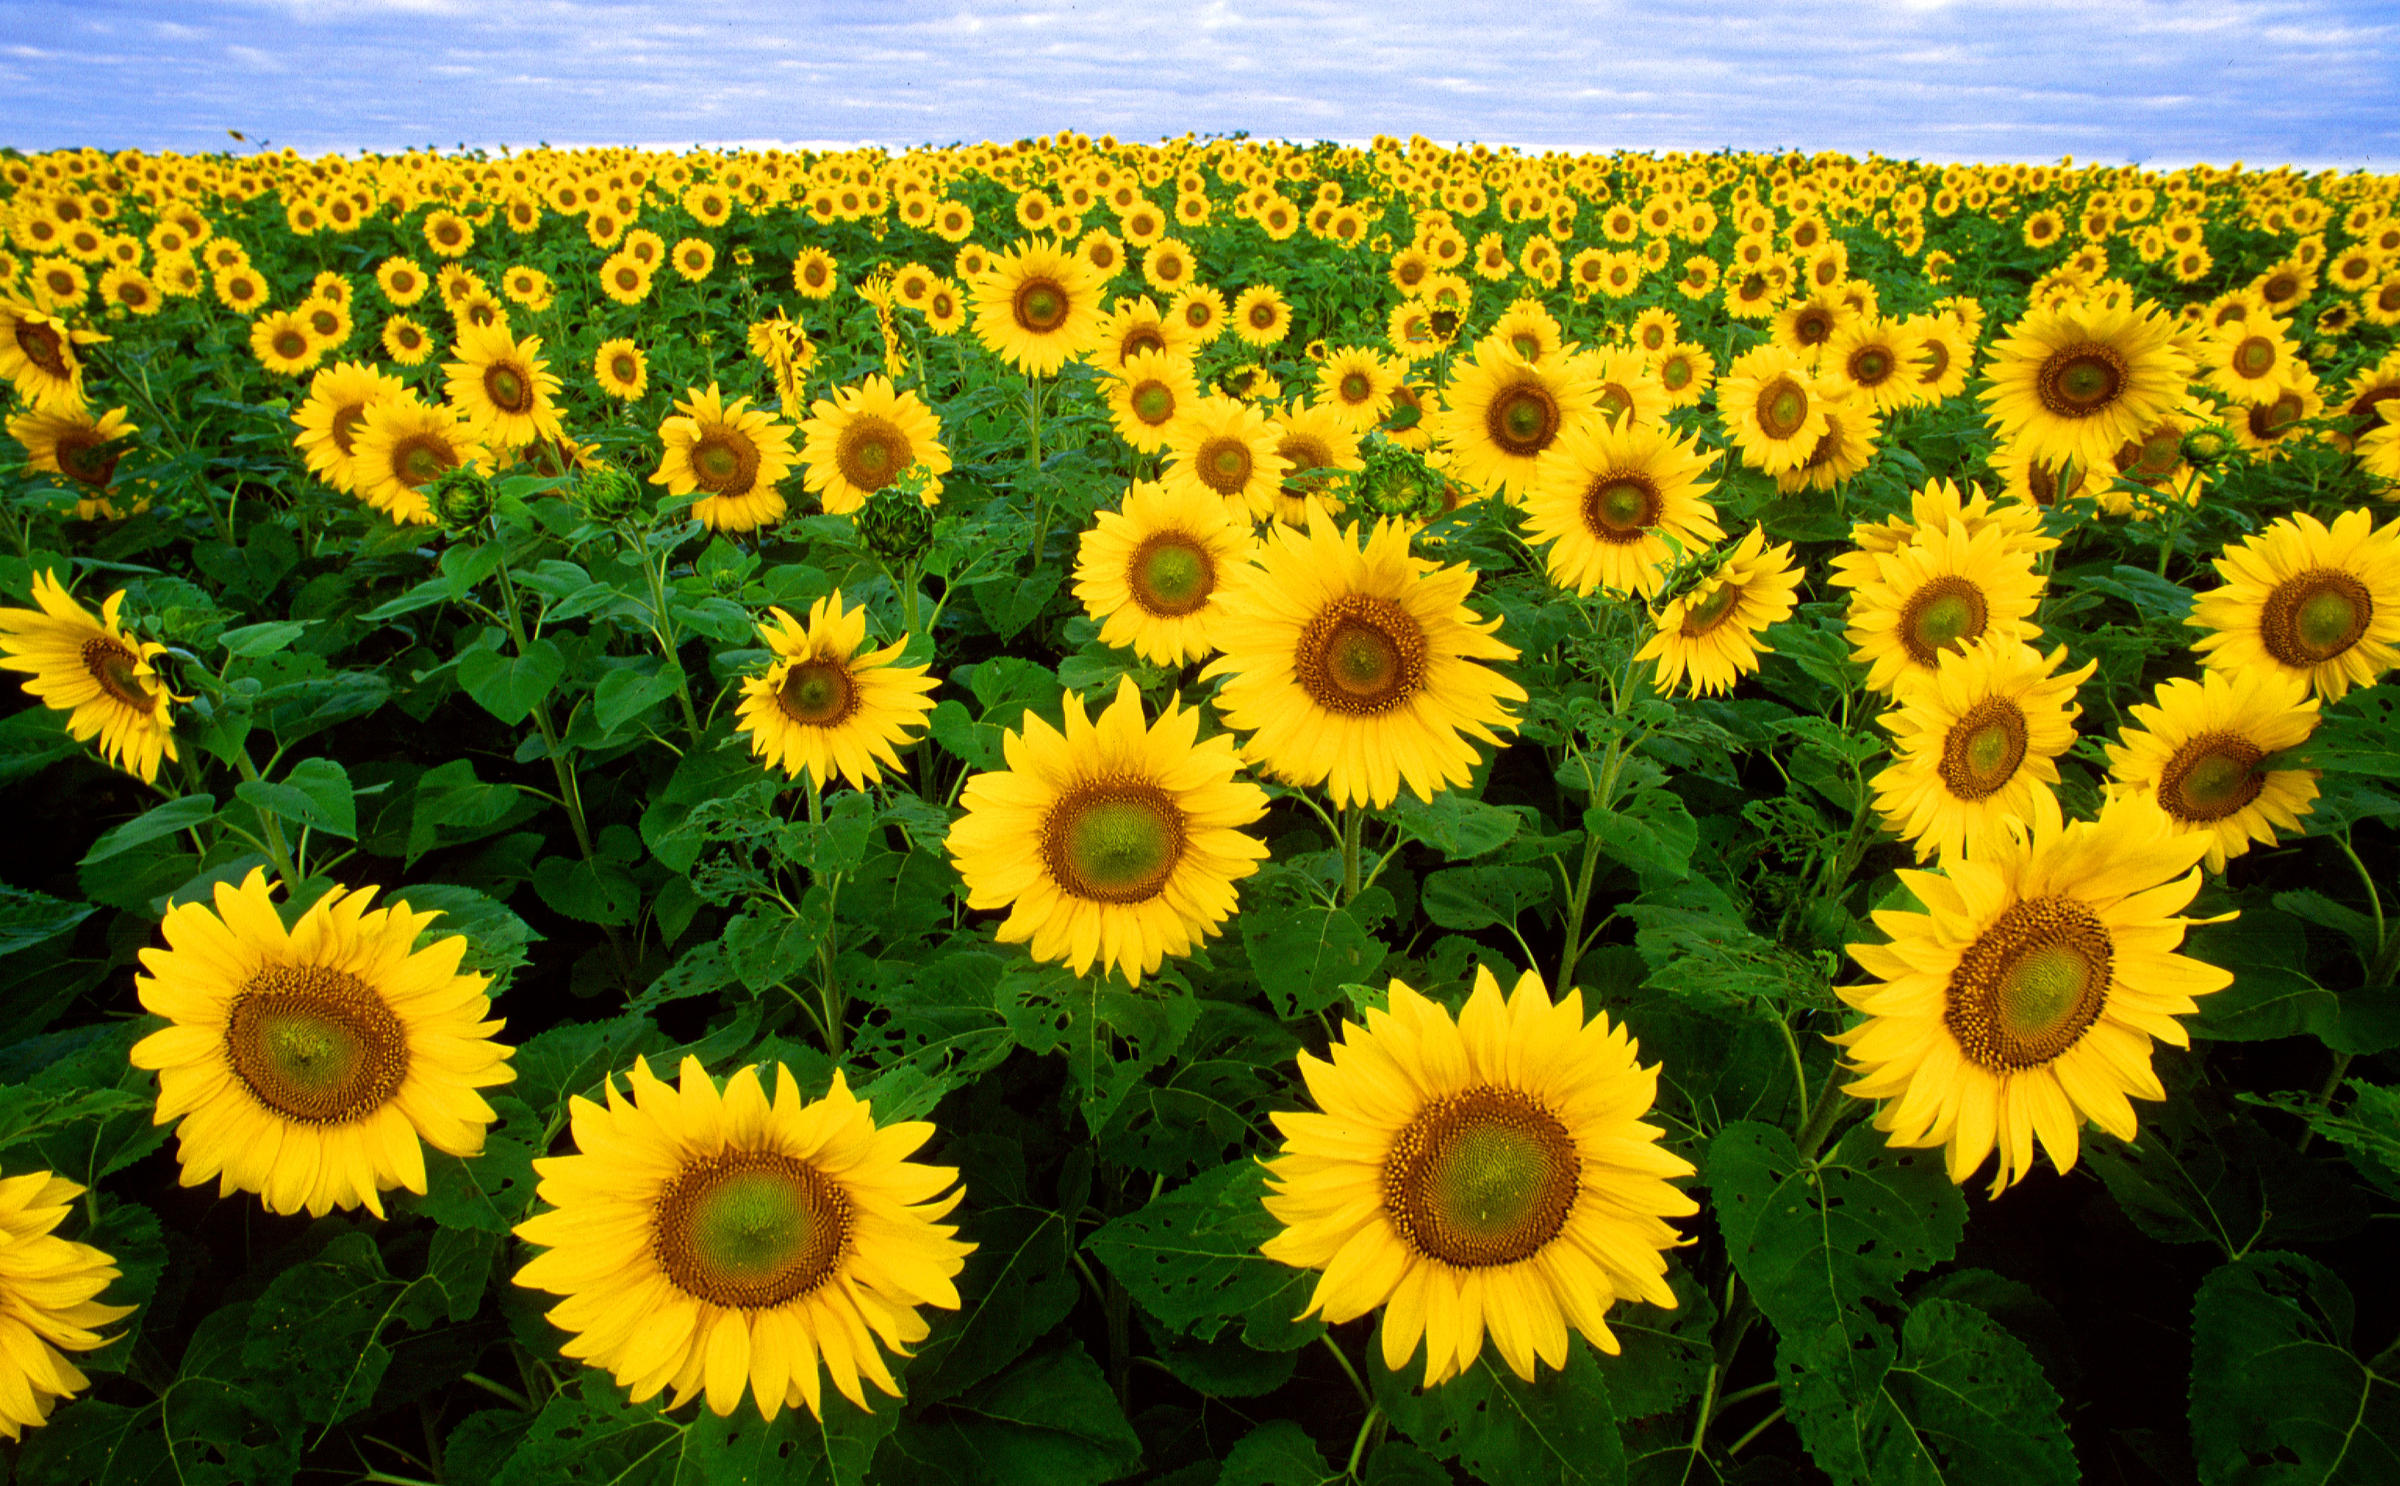 Lone Star State Tops Sunflower State in Sunflower Production | HPPR